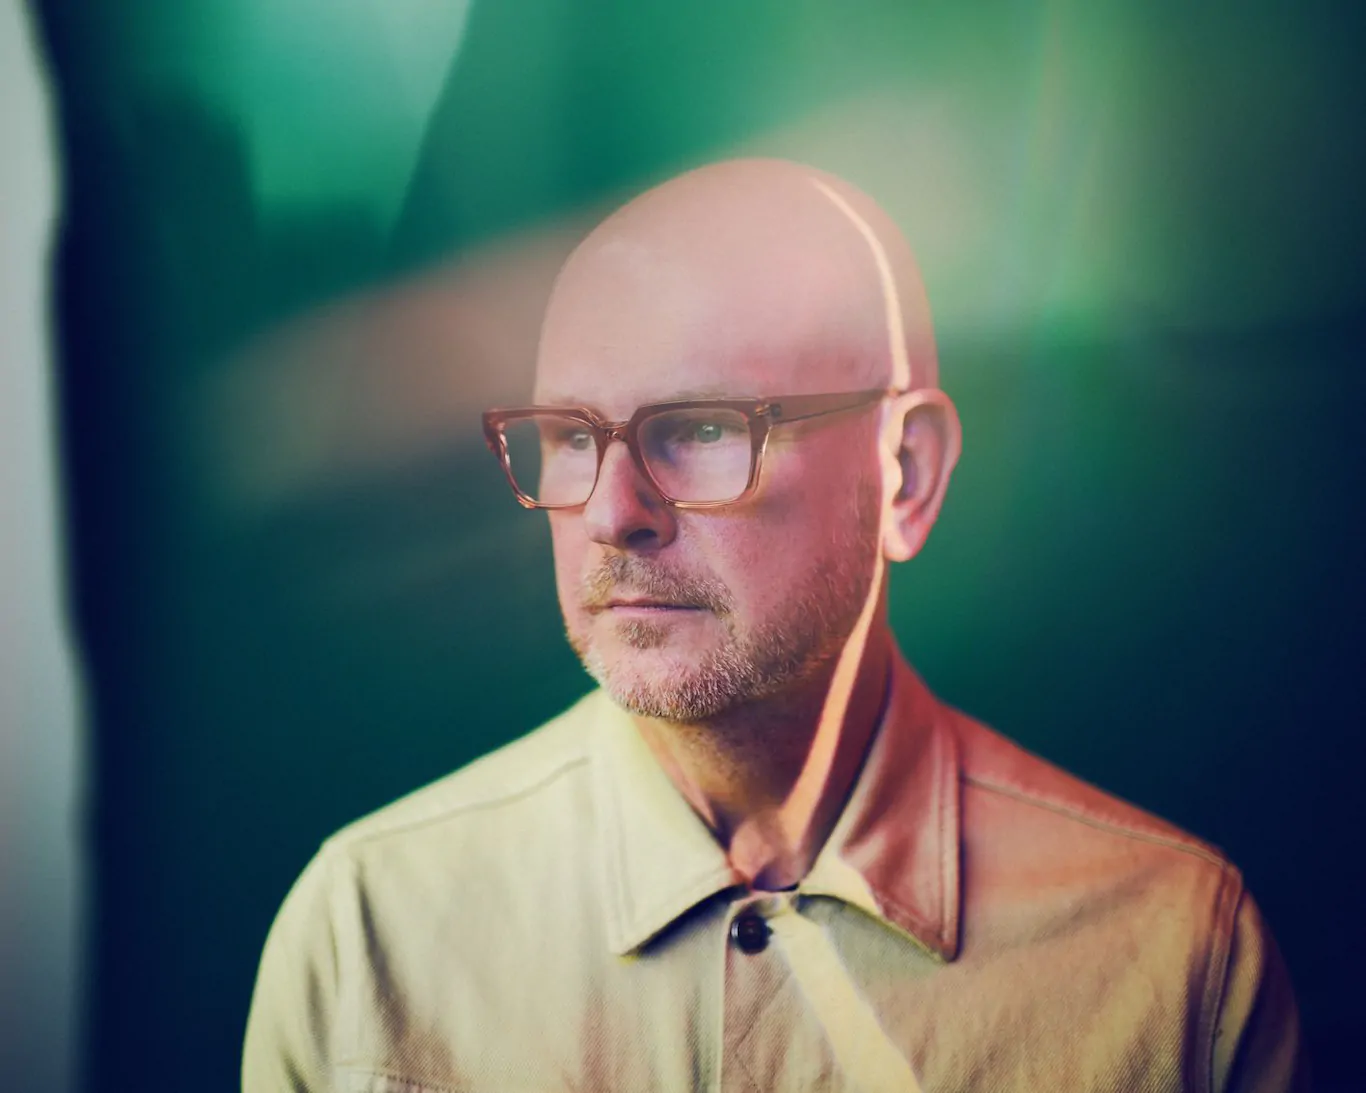 PHILIP SELWAY shares video for ‘Check For Signs Of Life’ from upcoming album “Strange Dance” & Announces UK and European tour dates